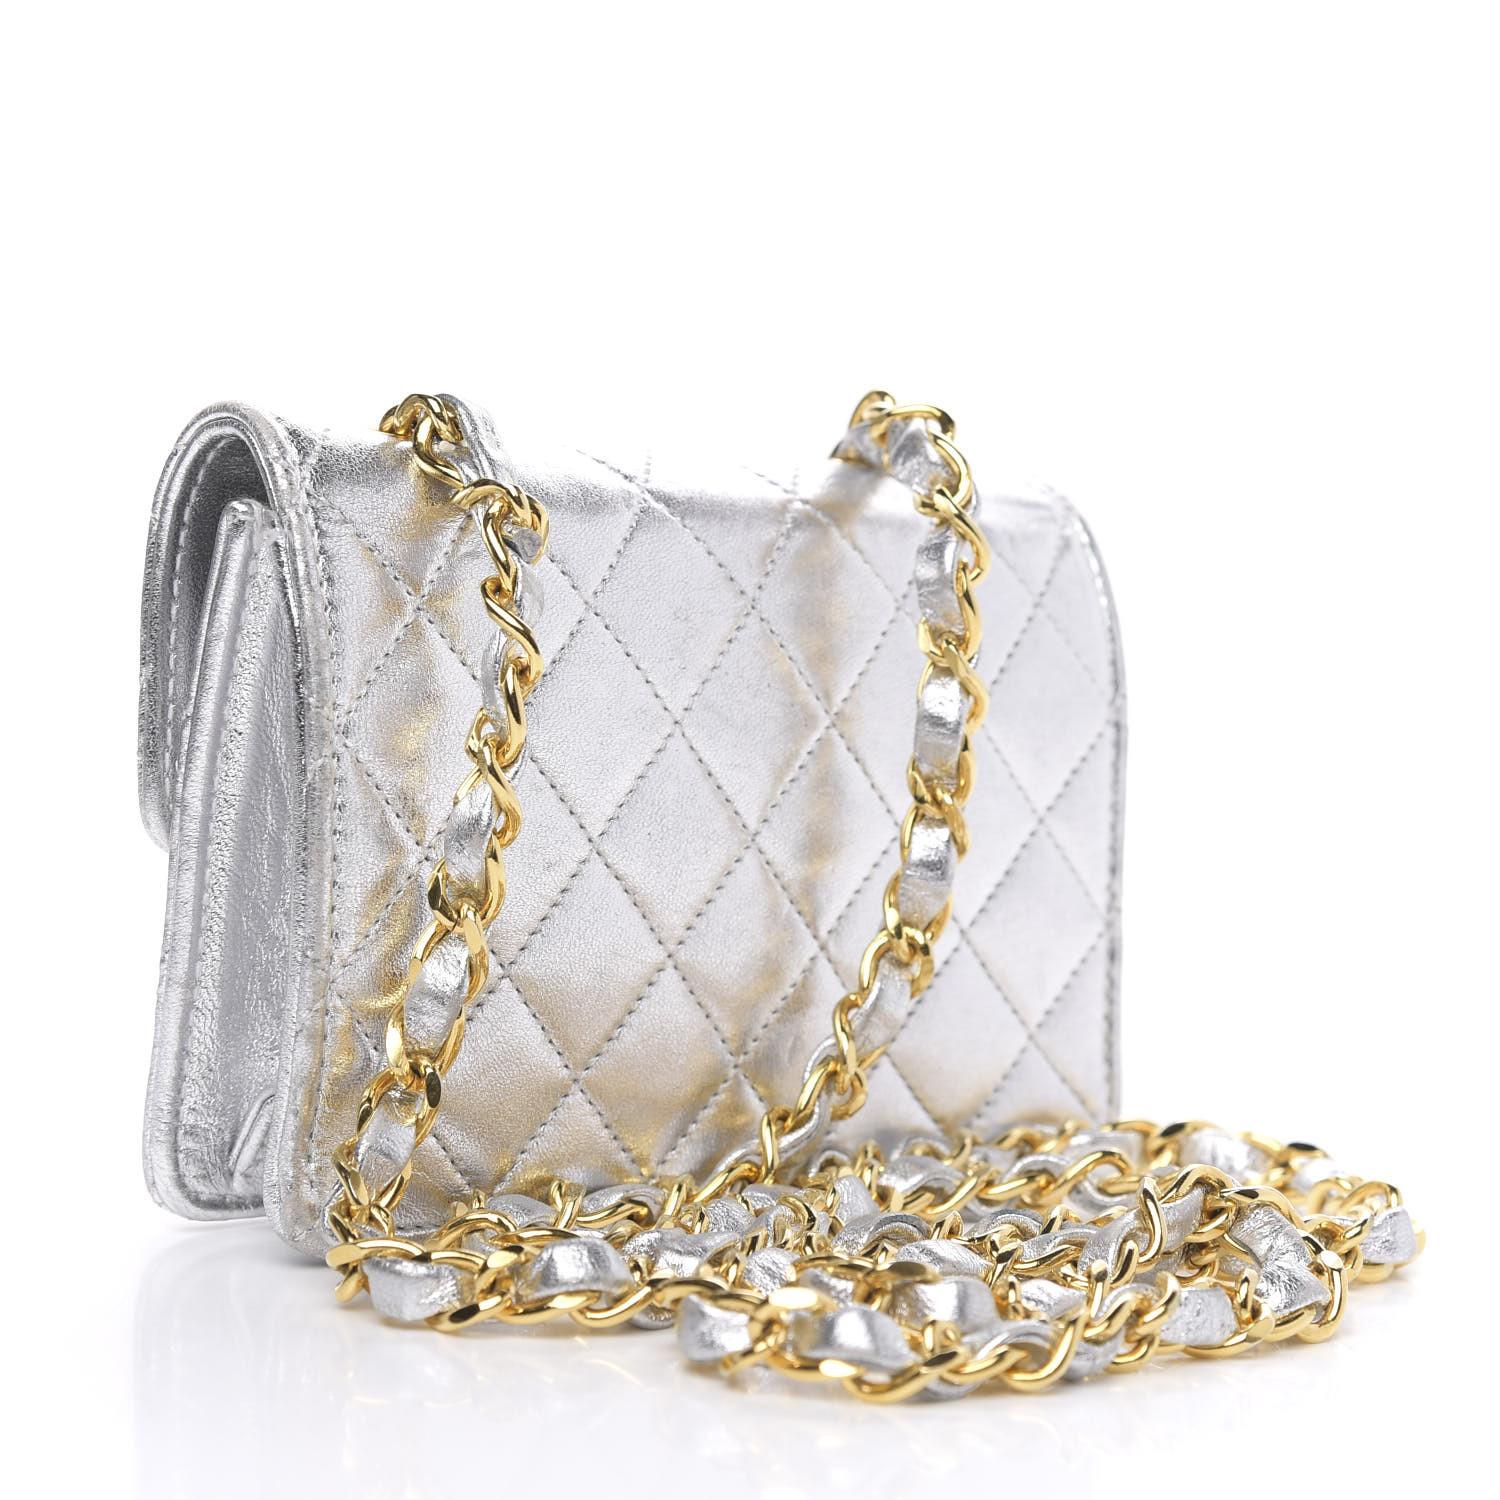 Chanel Vintage 90's Micro Mini Metallic Silver Quilted Classic Flap Bag In Good Condition For Sale In Miami, FL